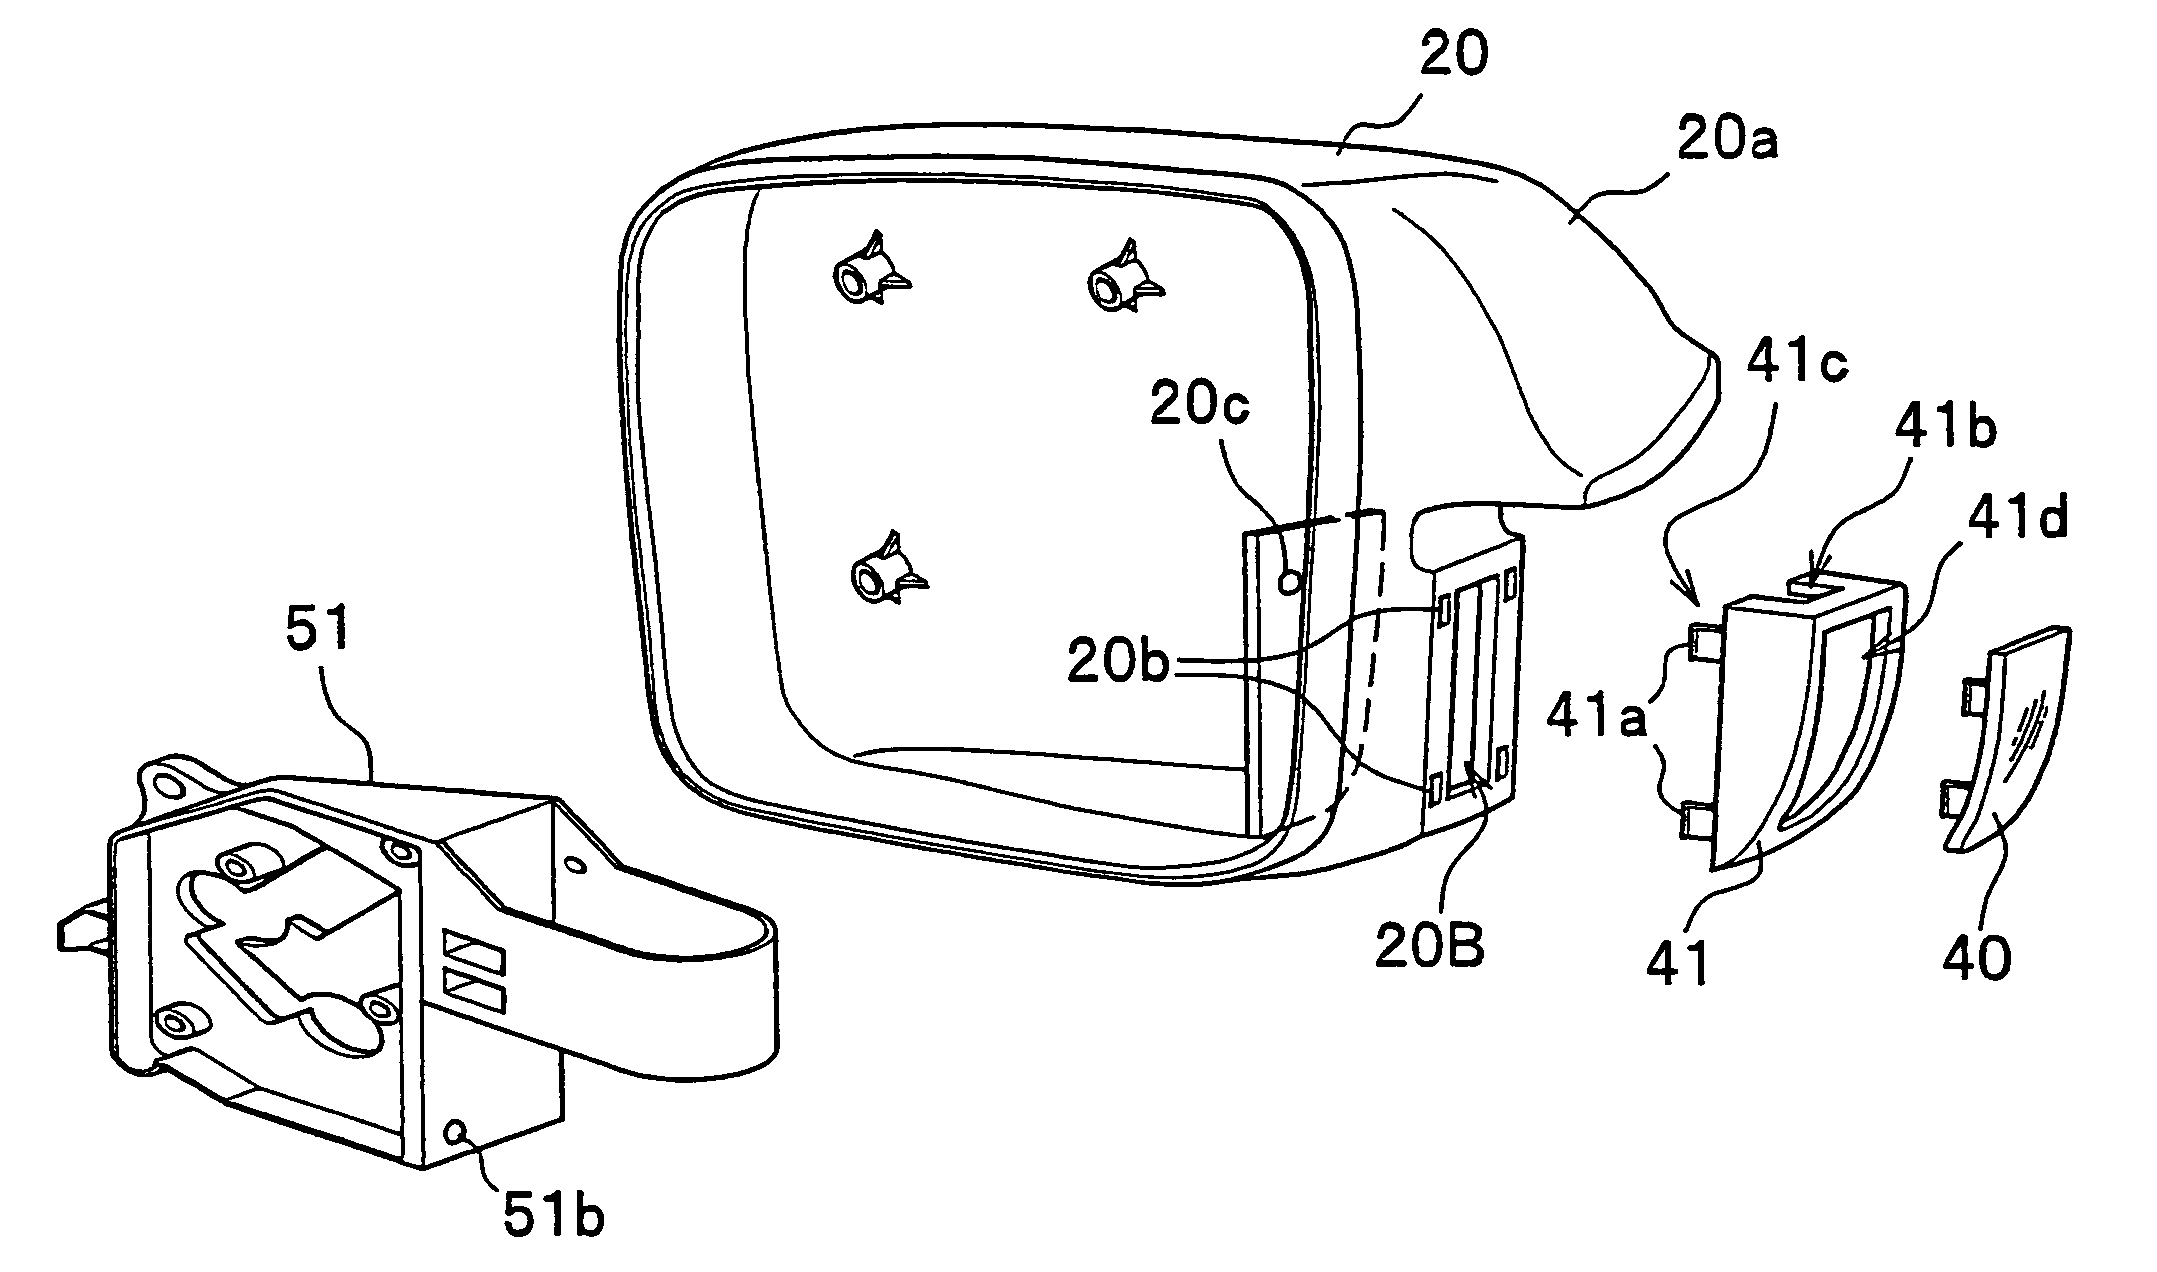 Vehicle side mirror assembly with rearward and forward viewing